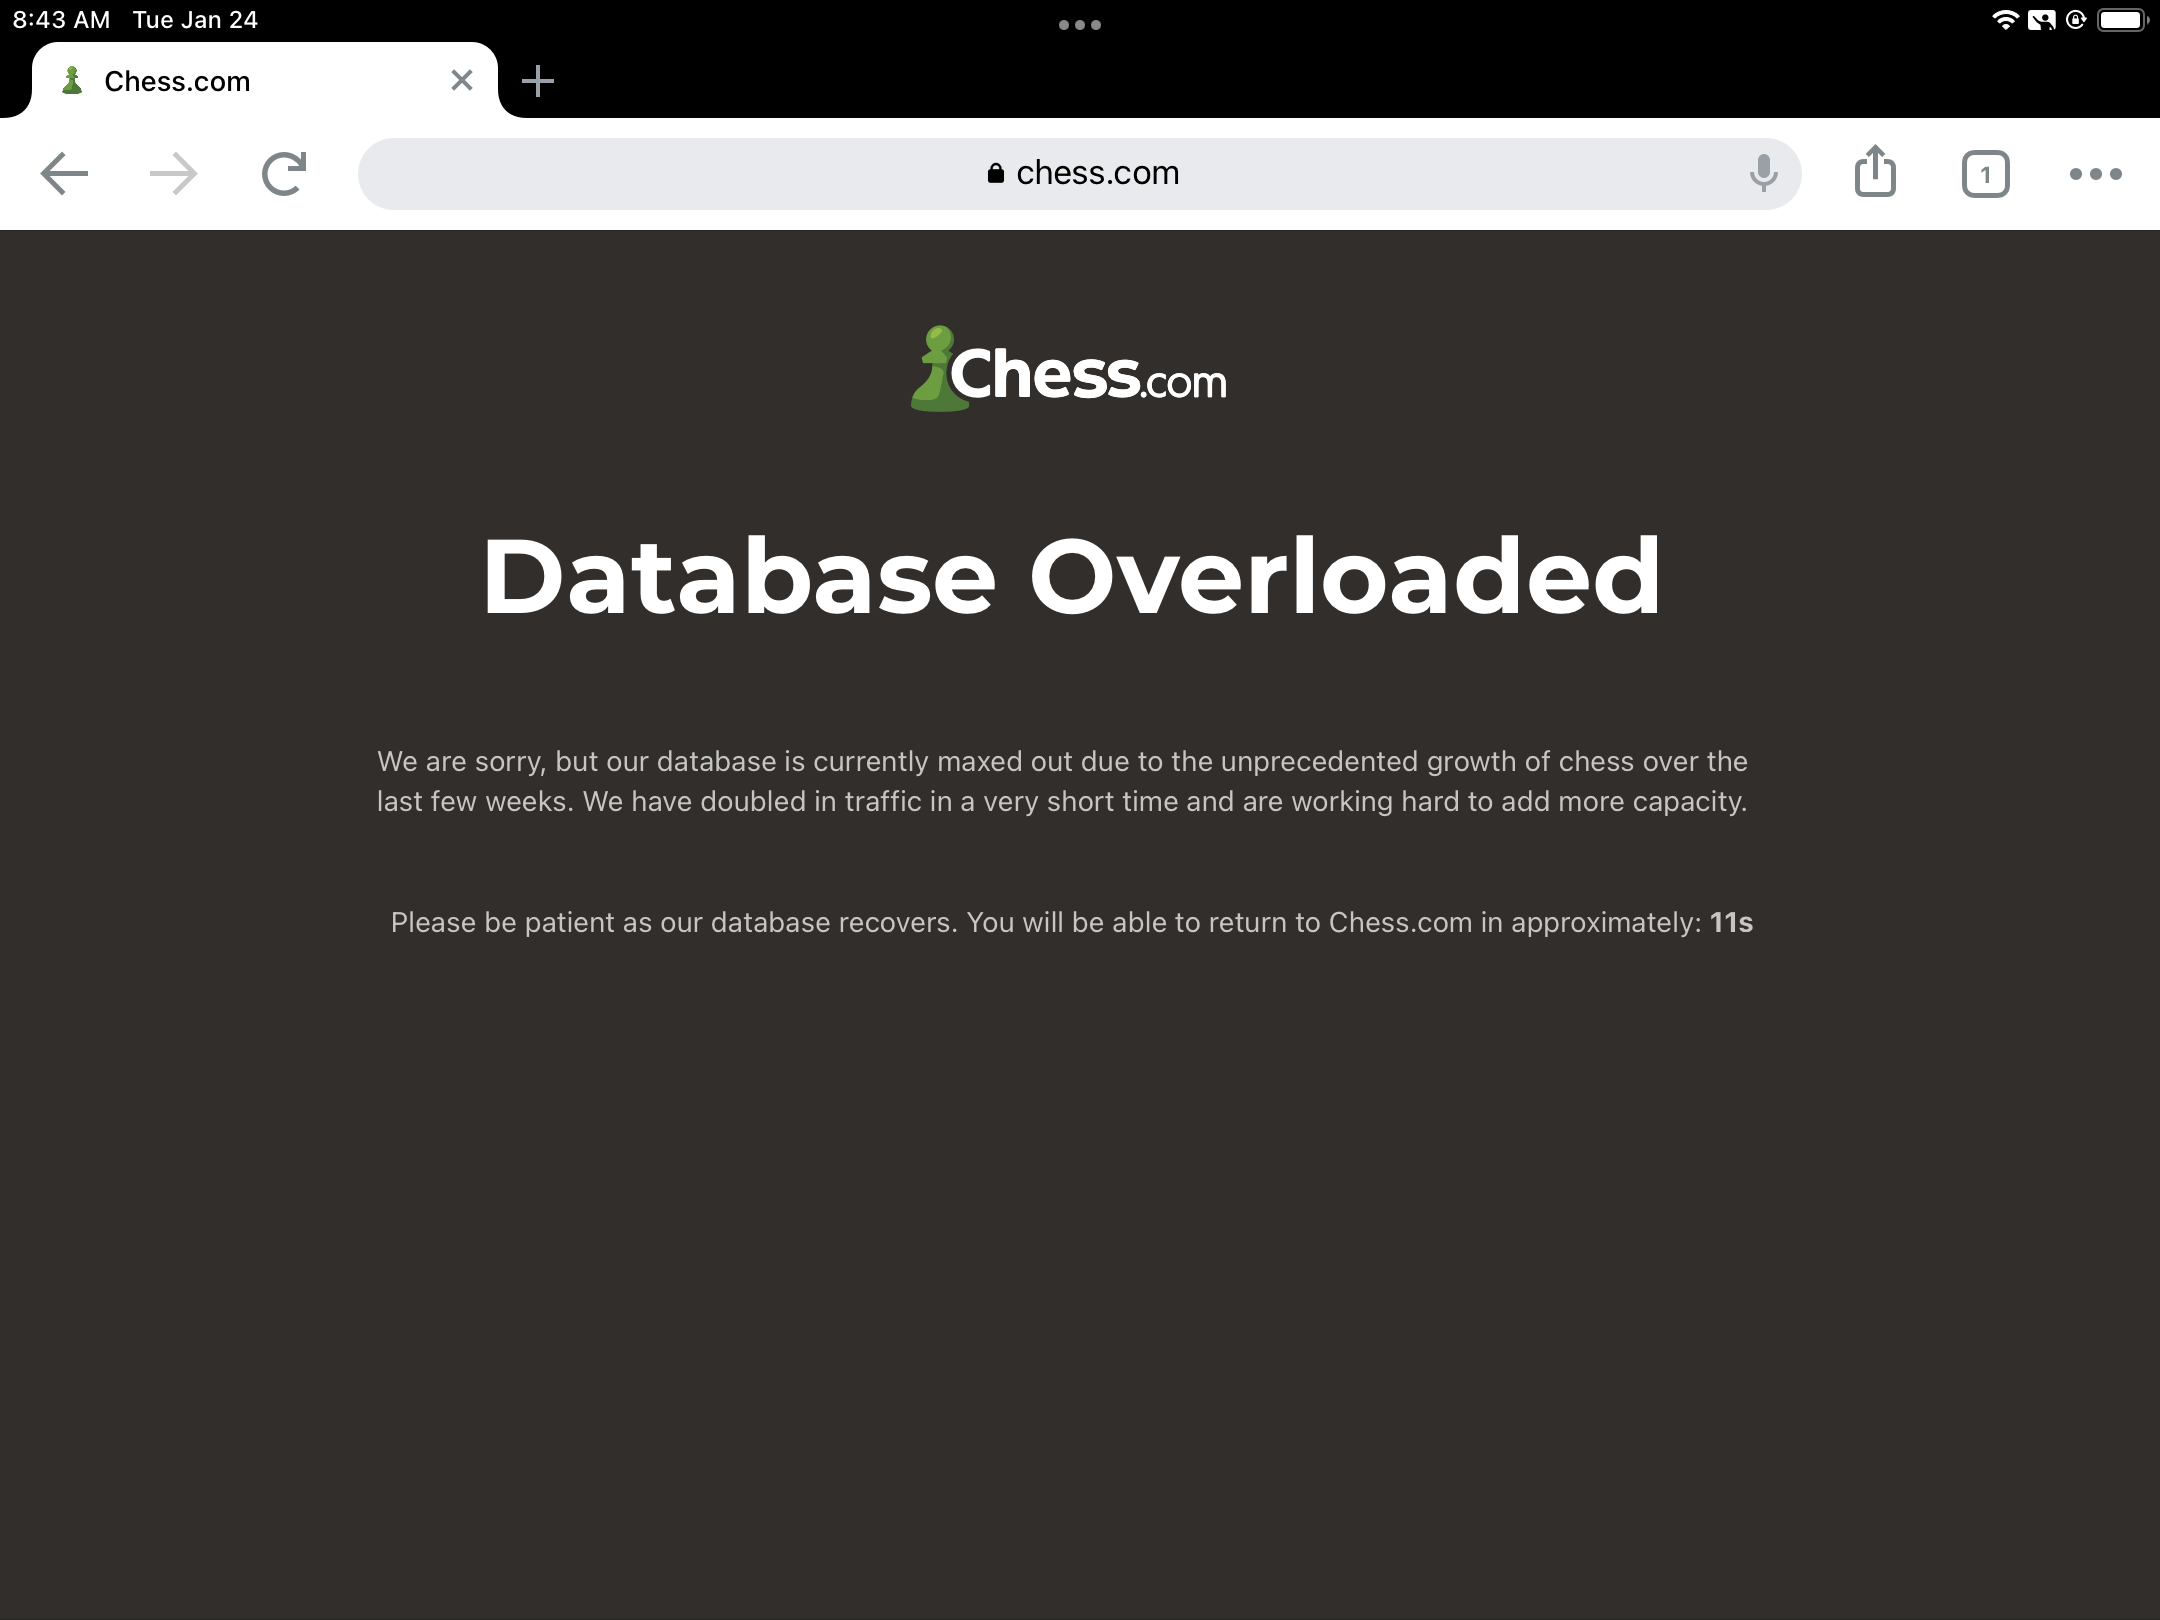 Screenshot of “Database Overloaded” message as seen by a user trying to log in. Source: [Chess.com Forum](https://www.chess.com/forum/view/general/chess-com-has-been-overloaded).